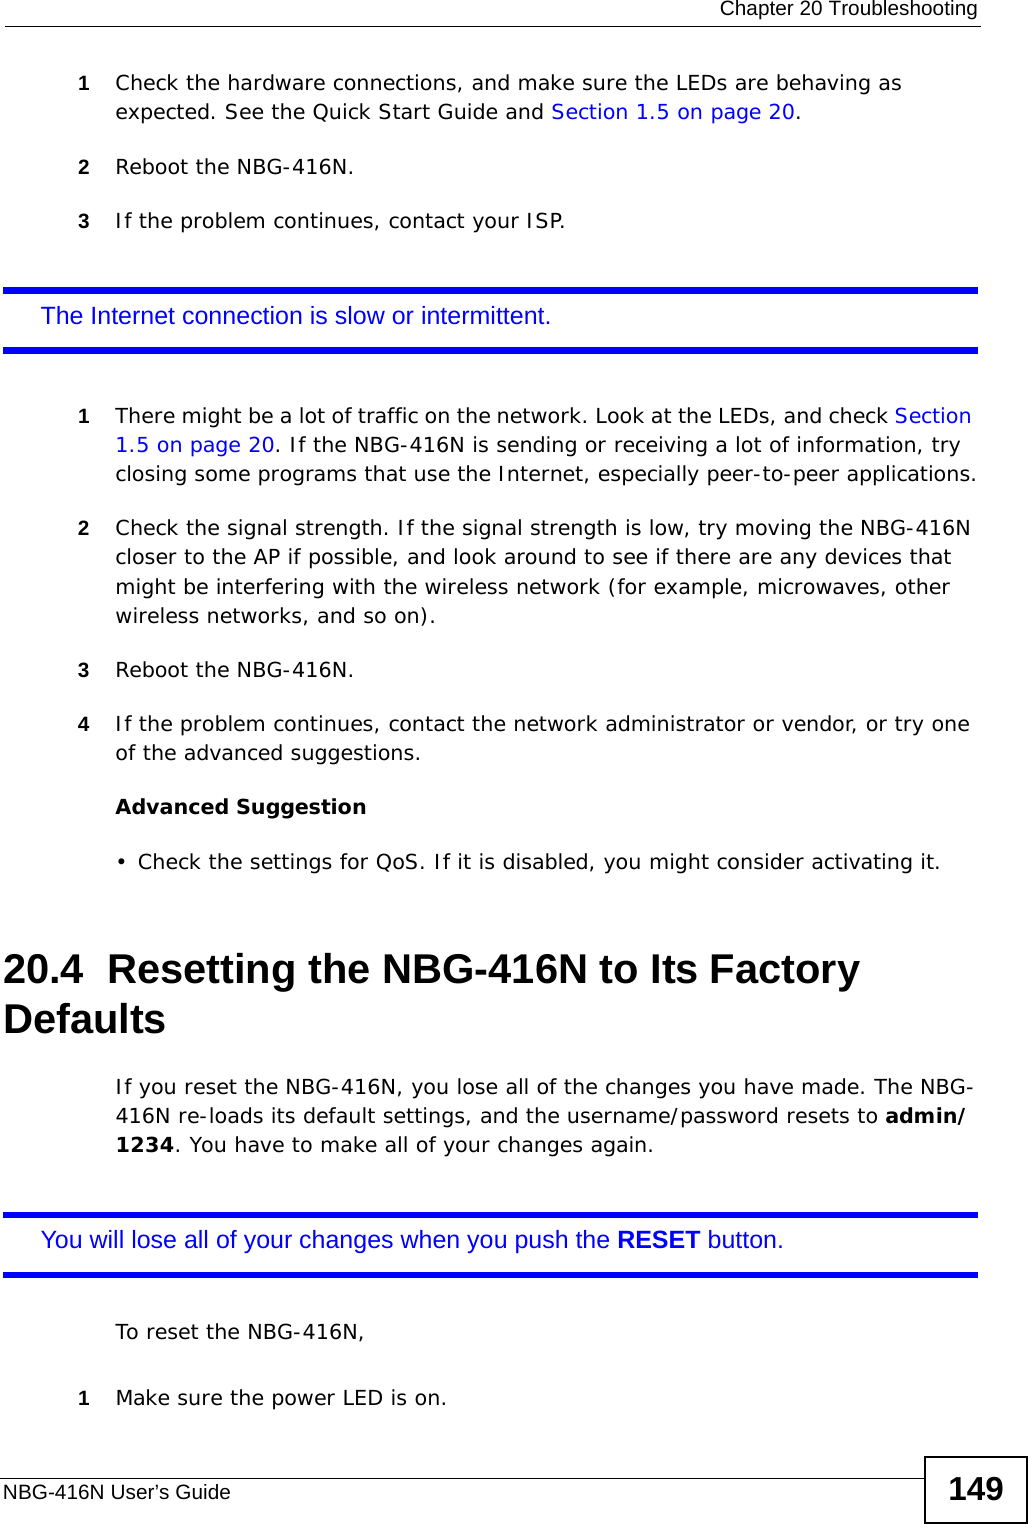  Chapter 20 TroubleshootingNBG-416N User’s Guide 1491Check the hardware connections, and make sure the LEDs are behaving as expected. See the Quick Start Guide and Section 1.5 on page 20. 2Reboot the NBG-416N.3If the problem continues, contact your ISP. The Internet connection is slow or intermittent.1There might be a lot of traffic on the network. Look at the LEDs, and check Section 1.5 on page 20. If the NBG-416N is sending or receiving a lot of information, try closing some programs that use the Internet, especially peer-to-peer applications.2Check the signal strength. If the signal strength is low, try moving the NBG-416N closer to the AP if possible, and look around to see if there are any devices that might be interfering with the wireless network (for example, microwaves, other wireless networks, and so on).3Reboot the NBG-416N.4If the problem continues, contact the network administrator or vendor, or try one of the advanced suggestions.Advanced Suggestion• Check the settings for QoS. If it is disabled, you might consider activating it.20.4  Resetting the NBG-416N to Its Factory Defaults If you reset the NBG-416N, you lose all of the changes you have made. The NBG-416N re-loads its default settings, and the username/password resets to admin/1234. You have to make all of your changes again.You will lose all of your changes when you push the RESET button.To reset the NBG-416N,1Make sure the power LED is on.